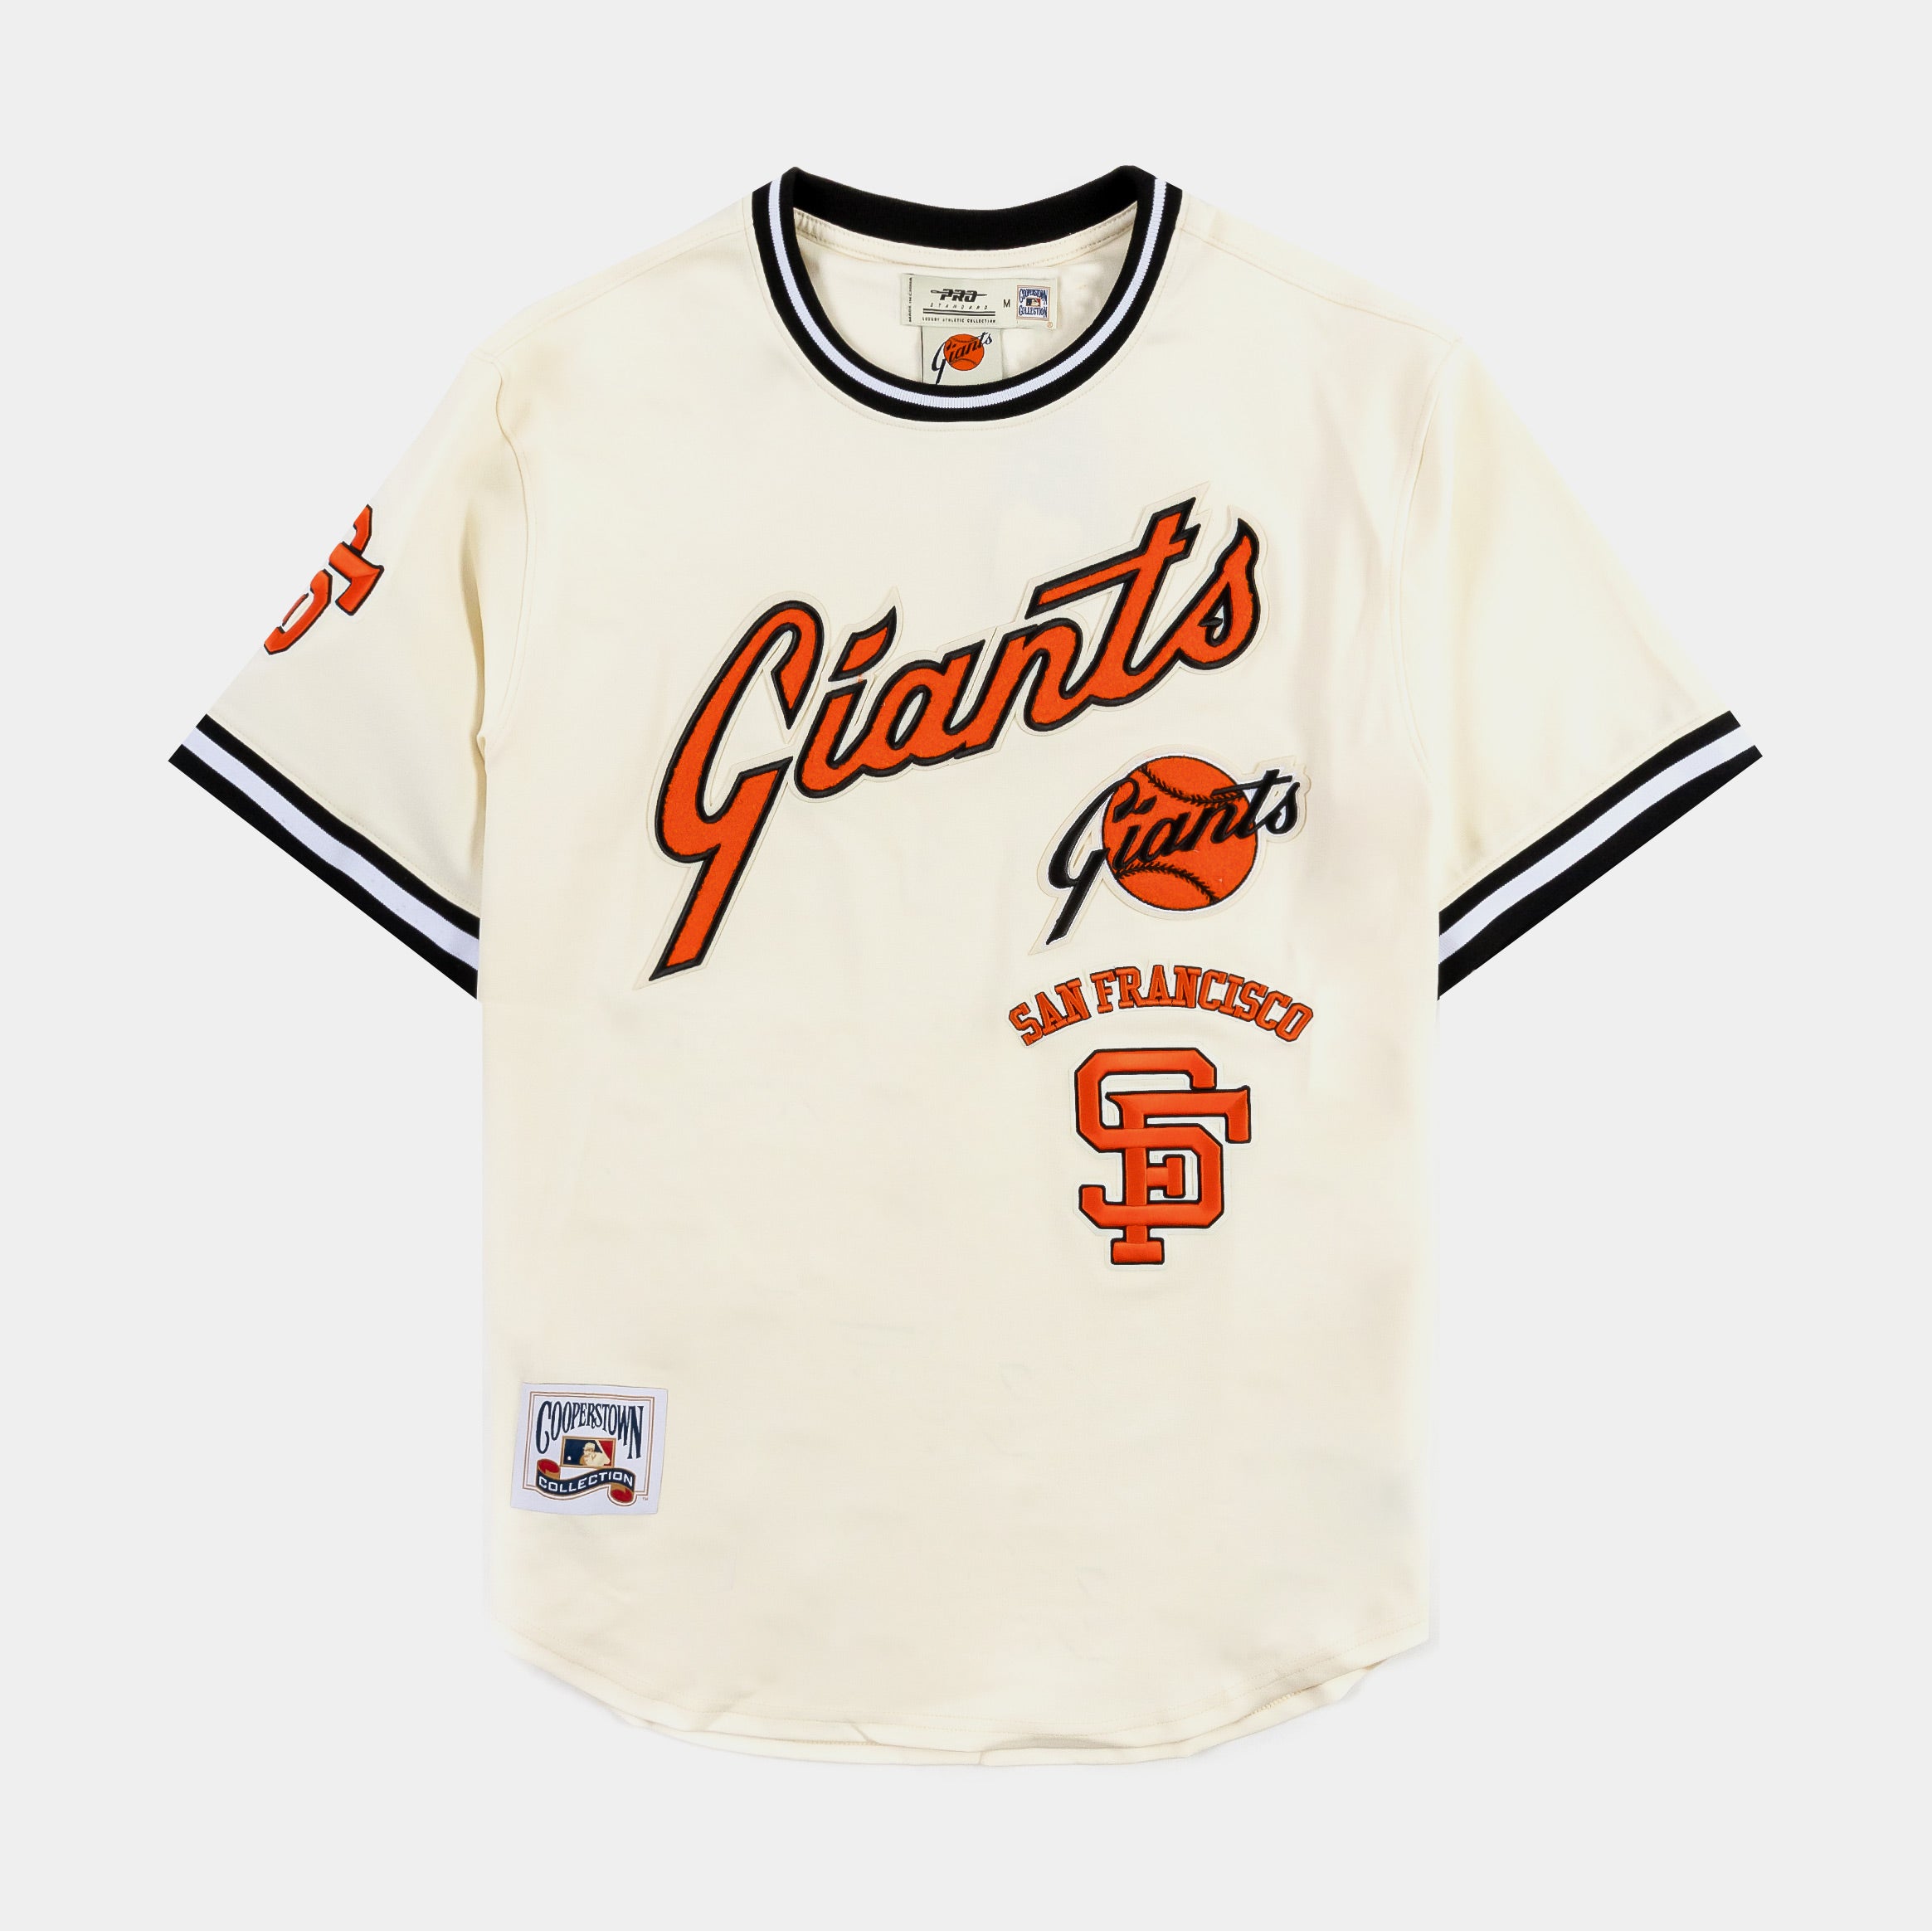 San Francisco Giants Cooperstown Collection, Throwback Giants